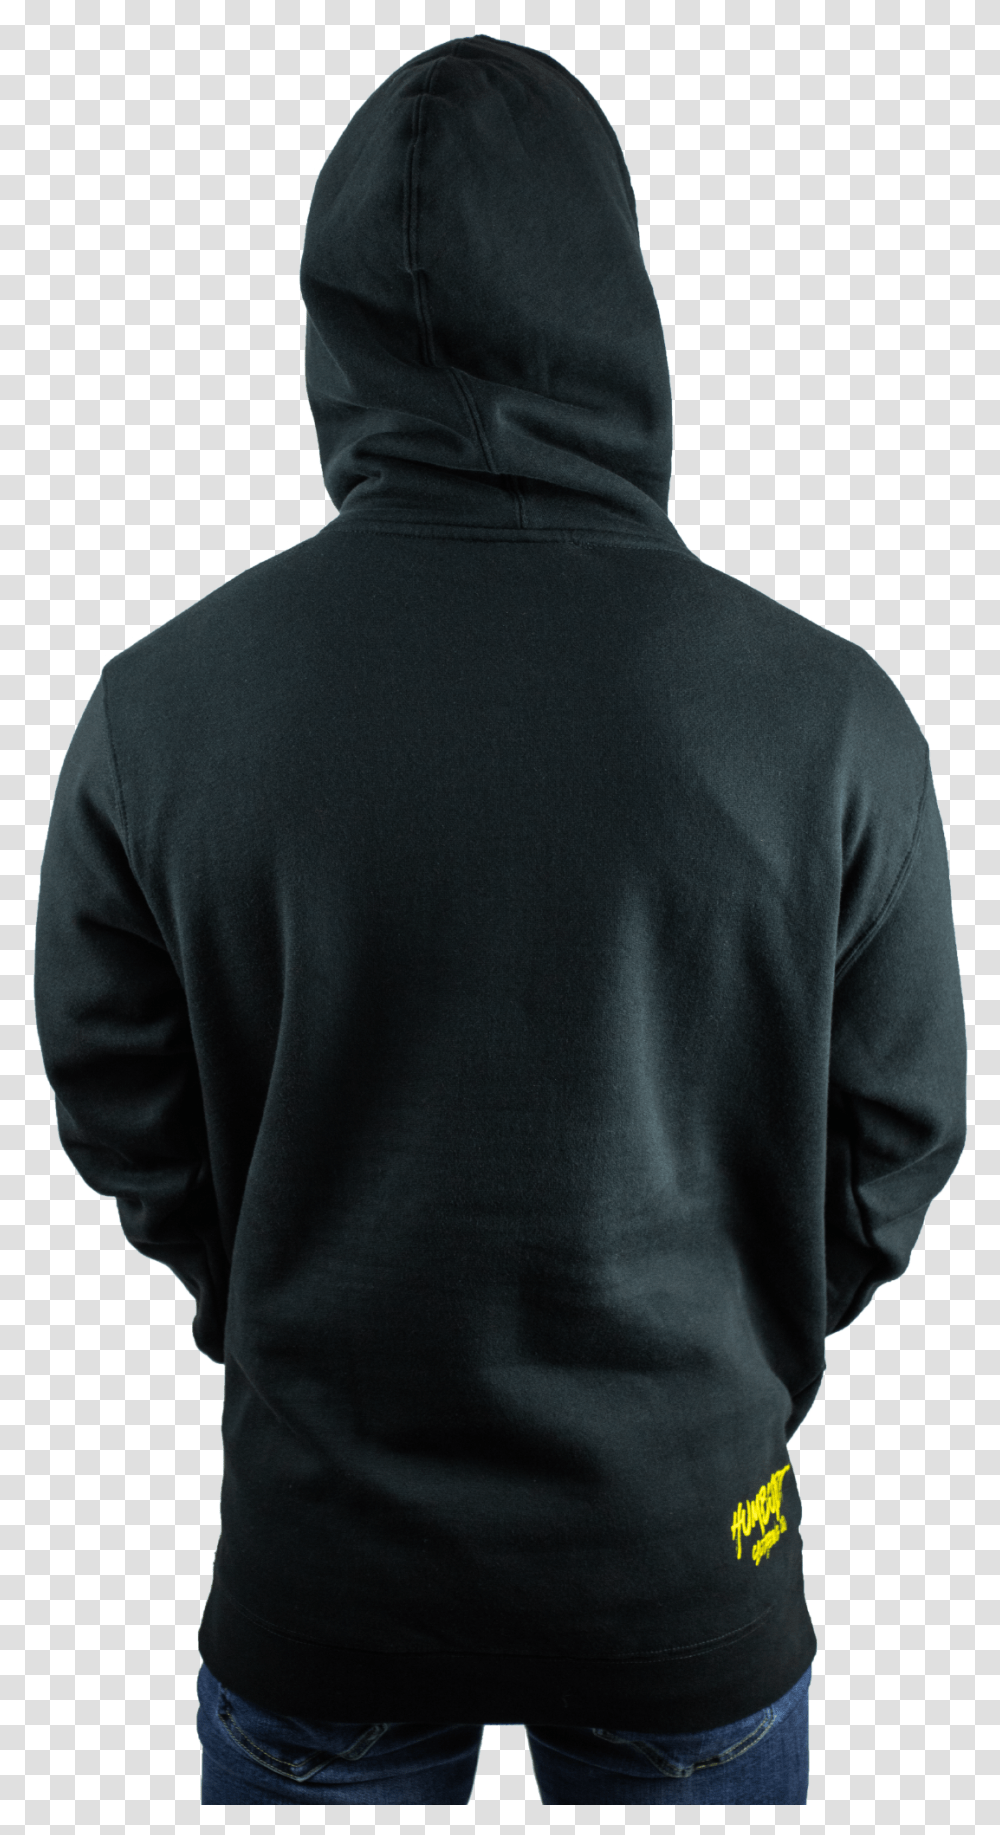 Class Lazyload Lazyload Mirage CloudzoomStyle Width Hoodie, Apparel, Sweatshirt, Sweater Transparent Png